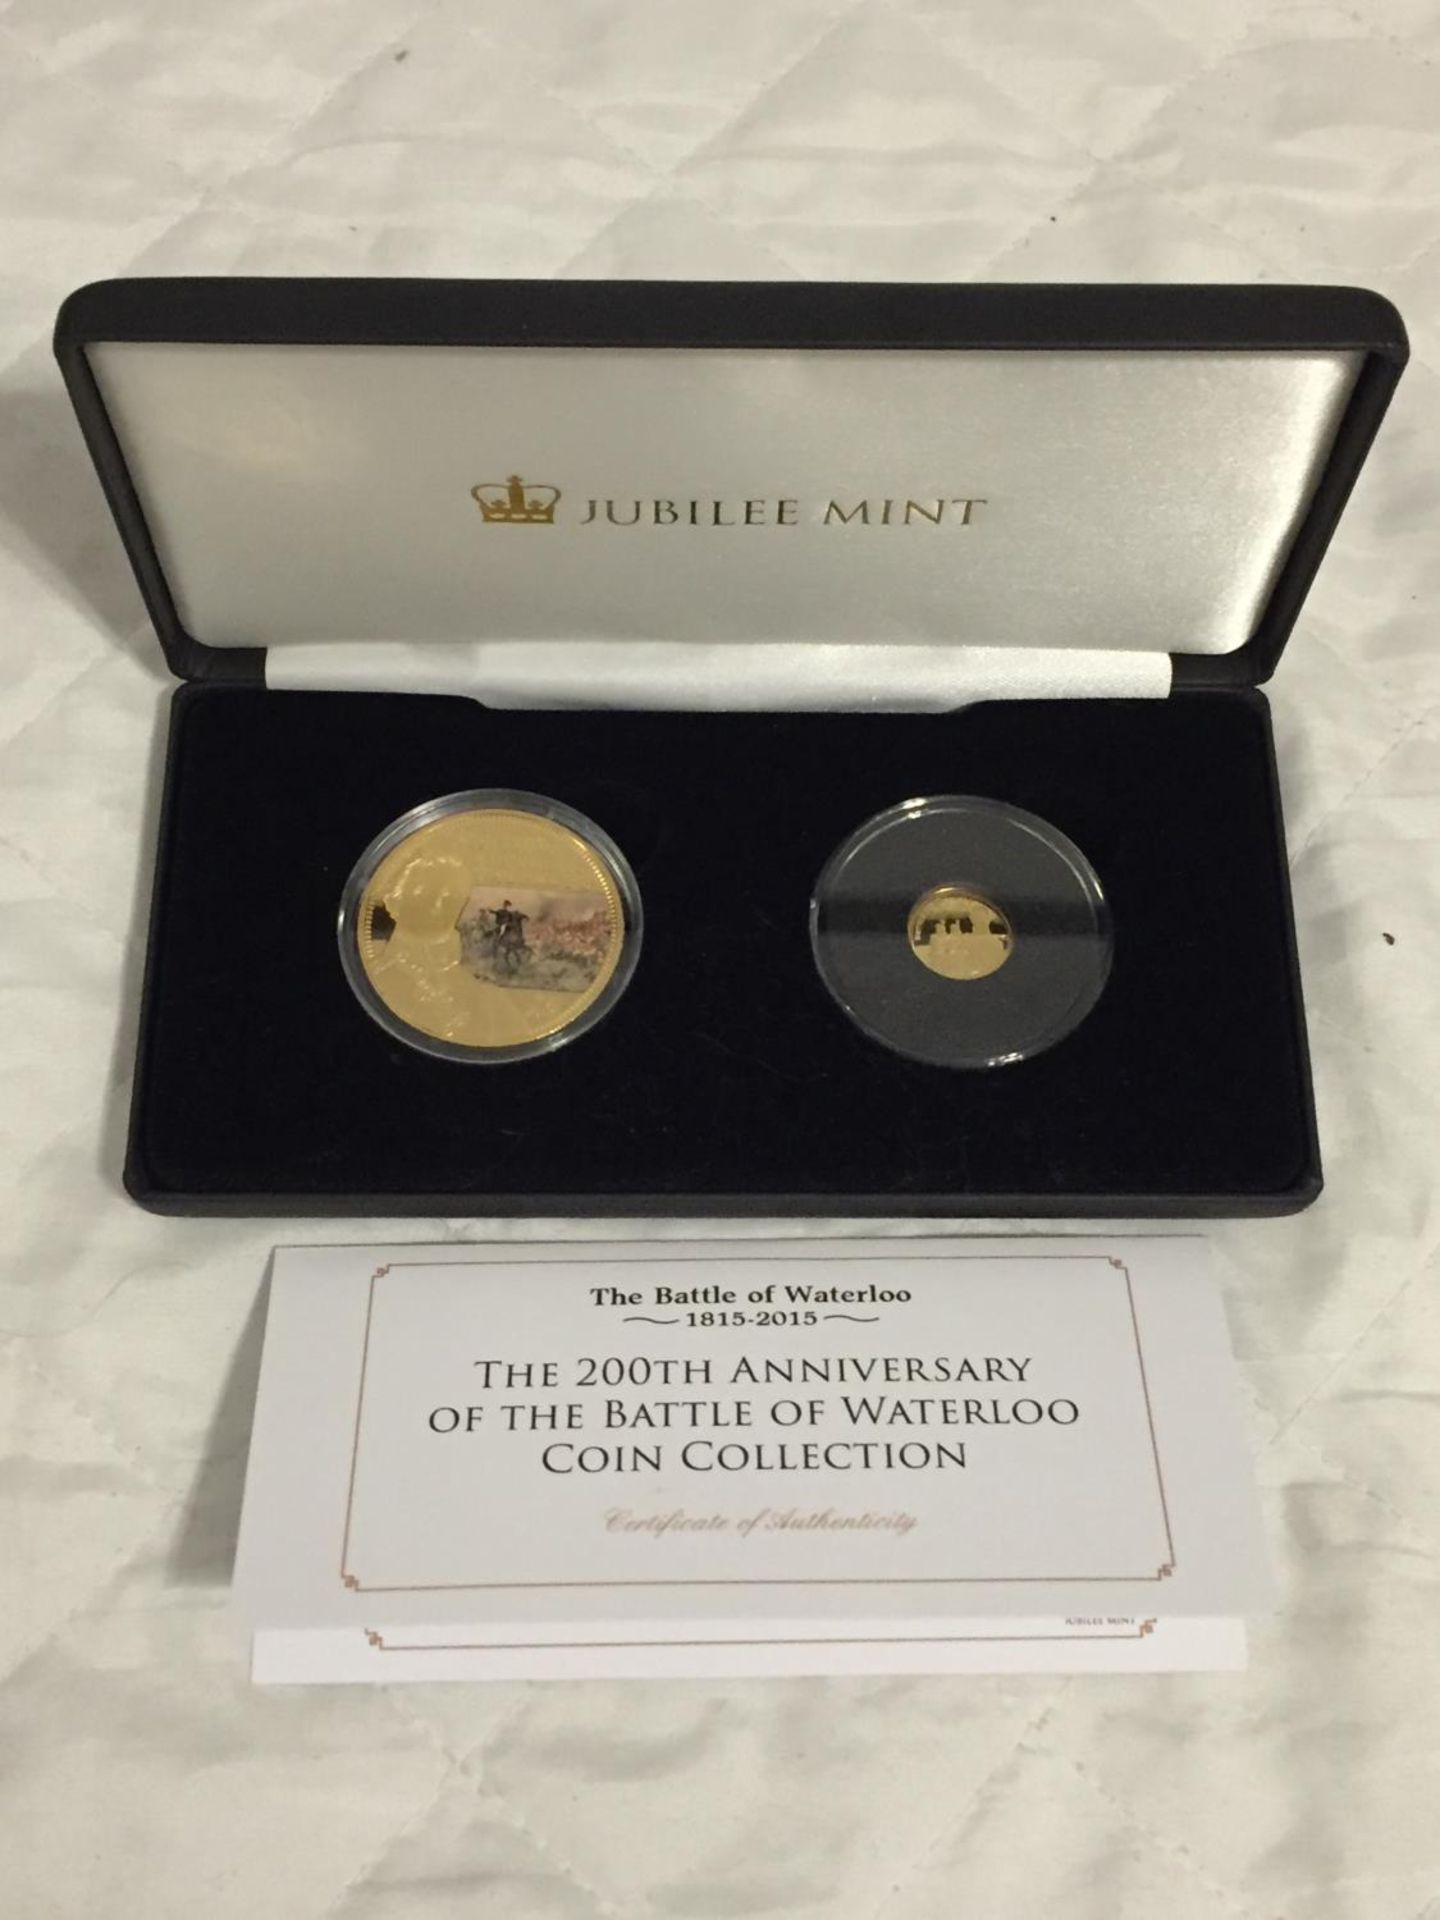 A CASED 200TH ANNIVERSARY OF THE BATTLE OF WATERLOO COIN COLLECTION SET STRUCK IN SOLID 9 CARAT GOLD